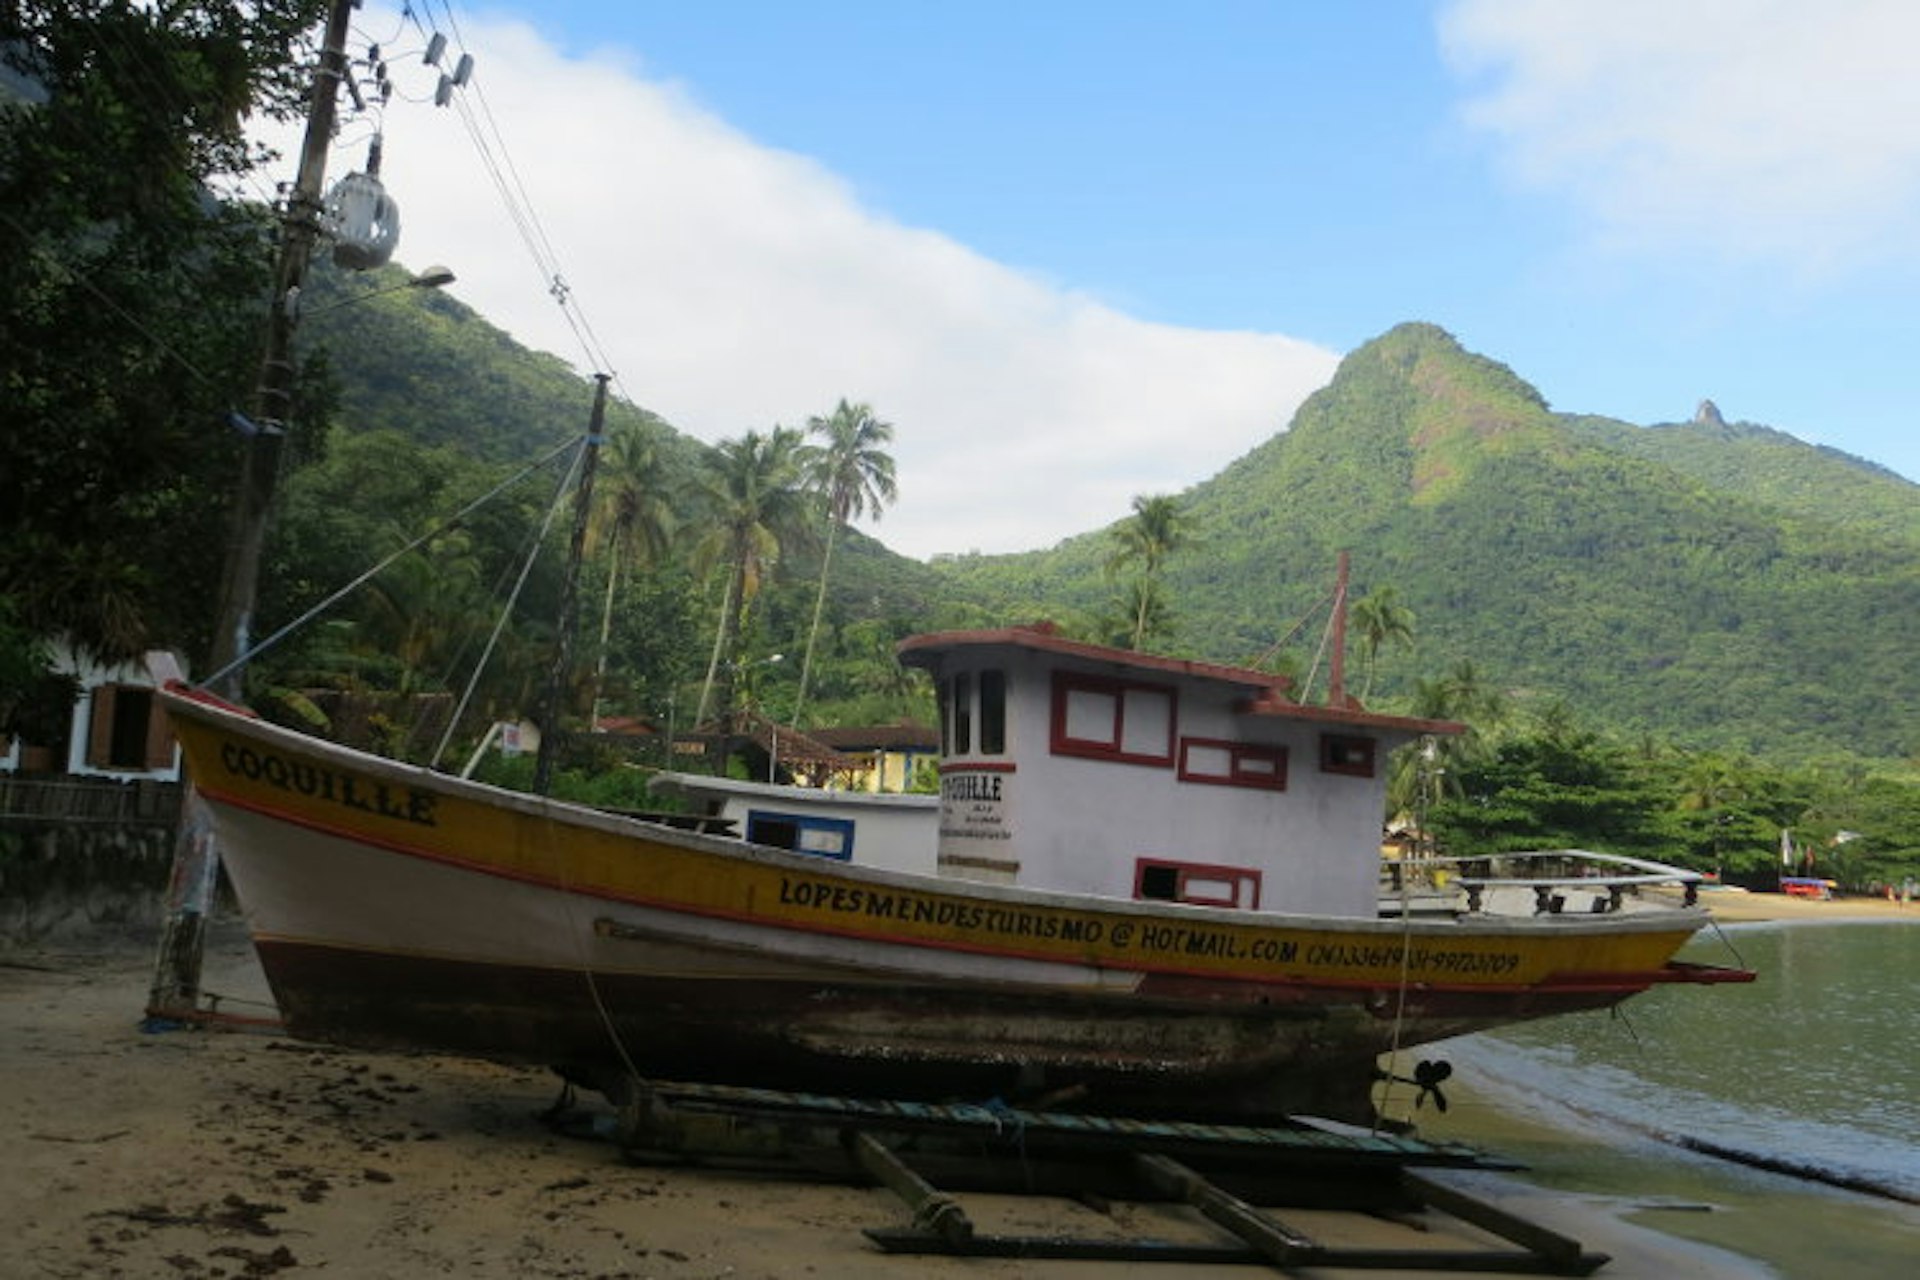 Boats on Praia do Canto, Ilha Grande. Image by Gregor Clark / Lonely Planet